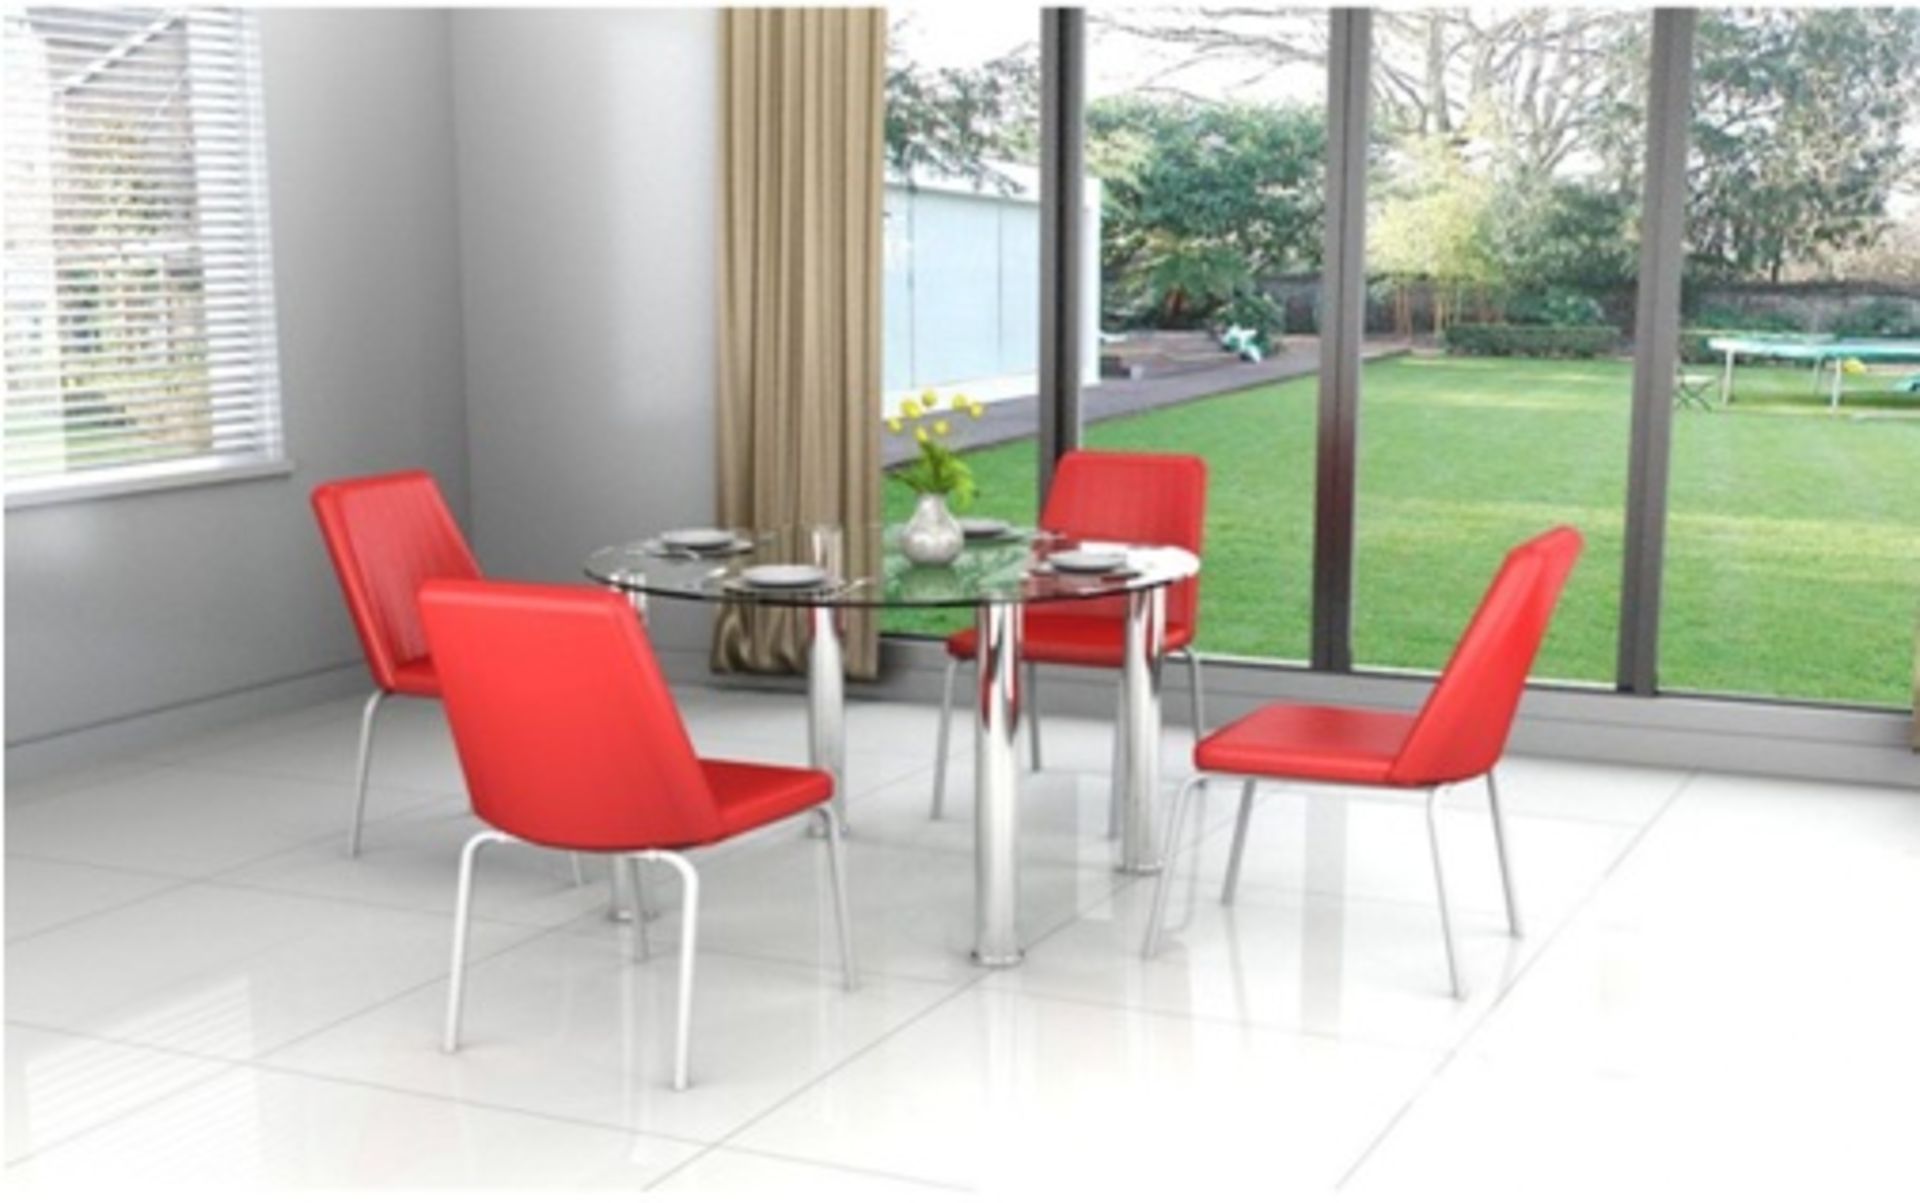 1 x Tempered Glass Dining Table With 4 Faux Leather Chairs in Black/White/Red - Brand New & Boxed